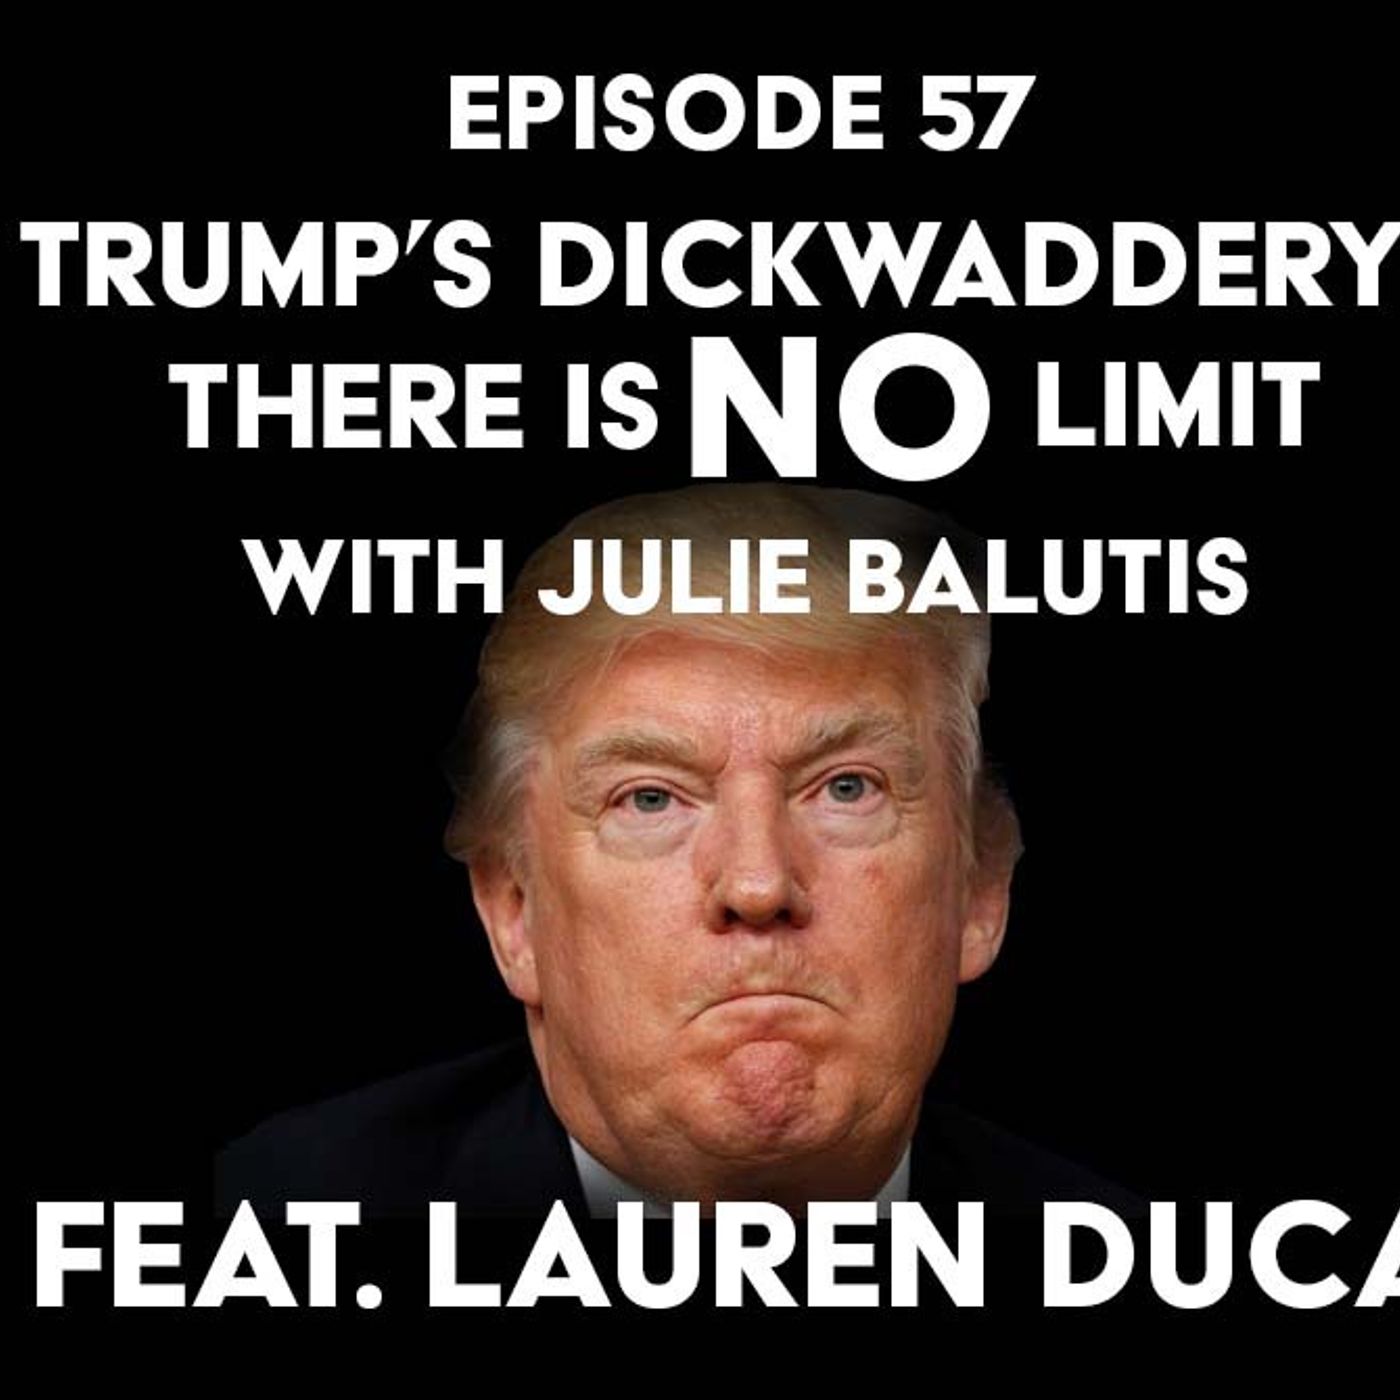 S1 Ep57: Trump’s Dickwaddery? There is No Limit with Julie Balutis and f/ Lauren Duca